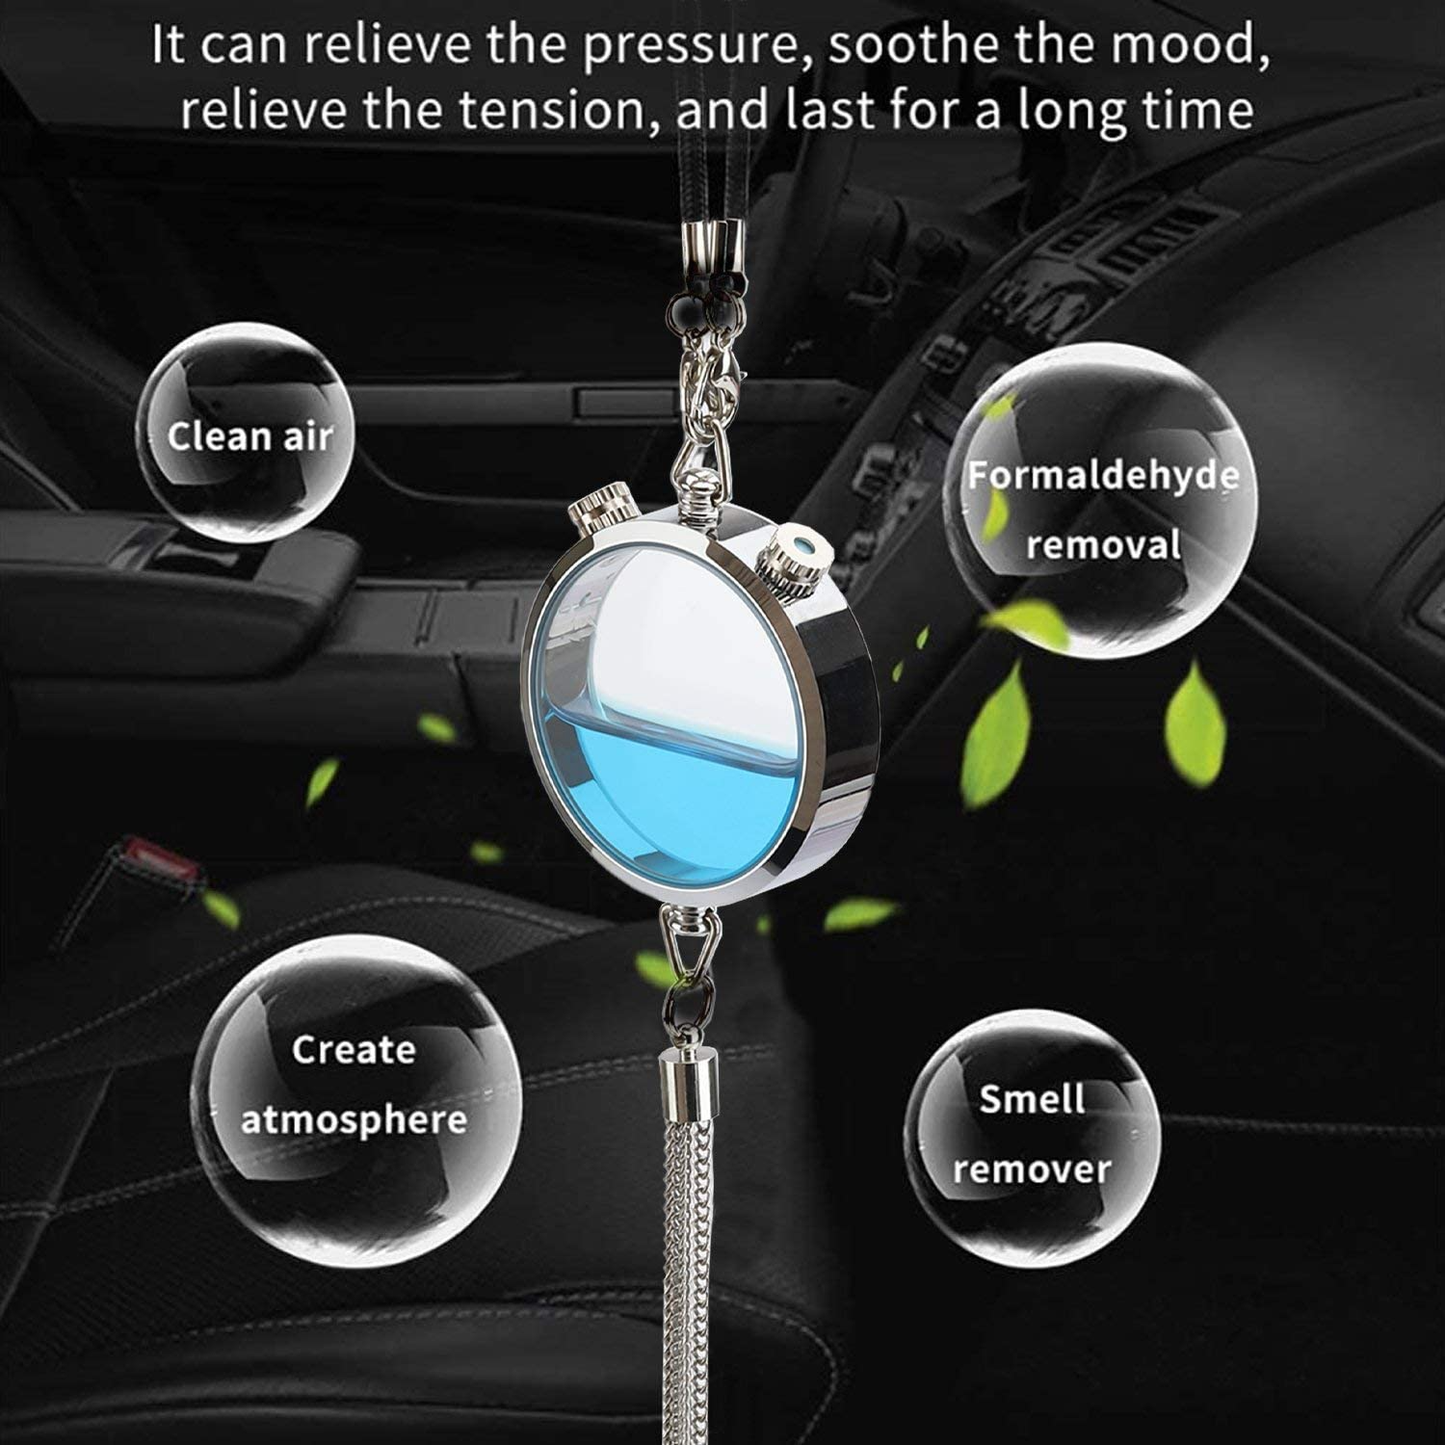 Customized Car Air Freshener Perfume Box Pendant with Photo/Text Personalized Car Accessories Rear View Mirror Charm Fragrance ktclubs.com